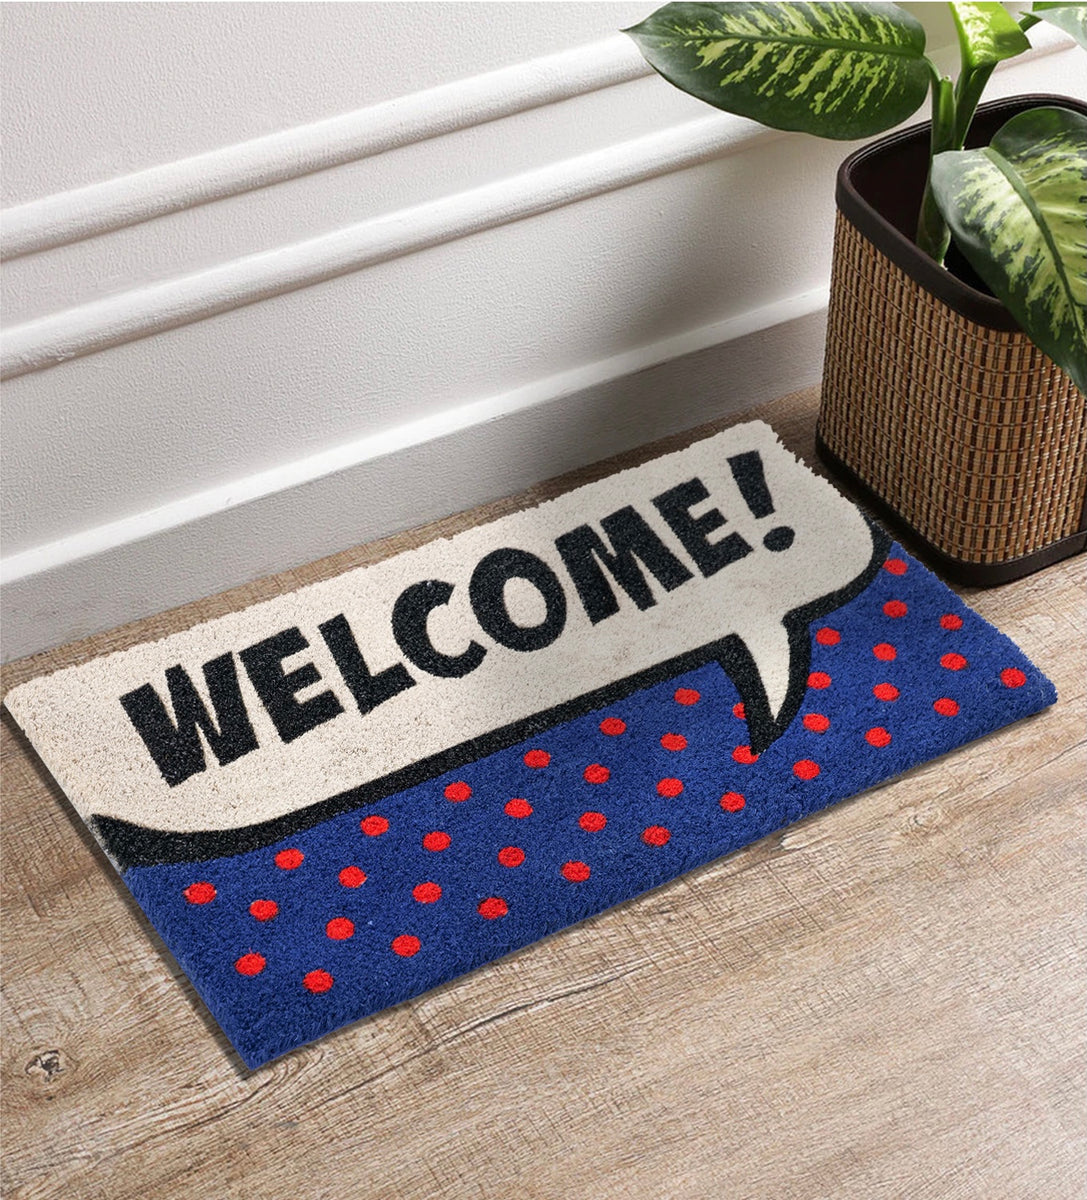 Welcome with Polka Dots Pop Art Fun Design Printed Blue and Red Natural Coir Door Mat